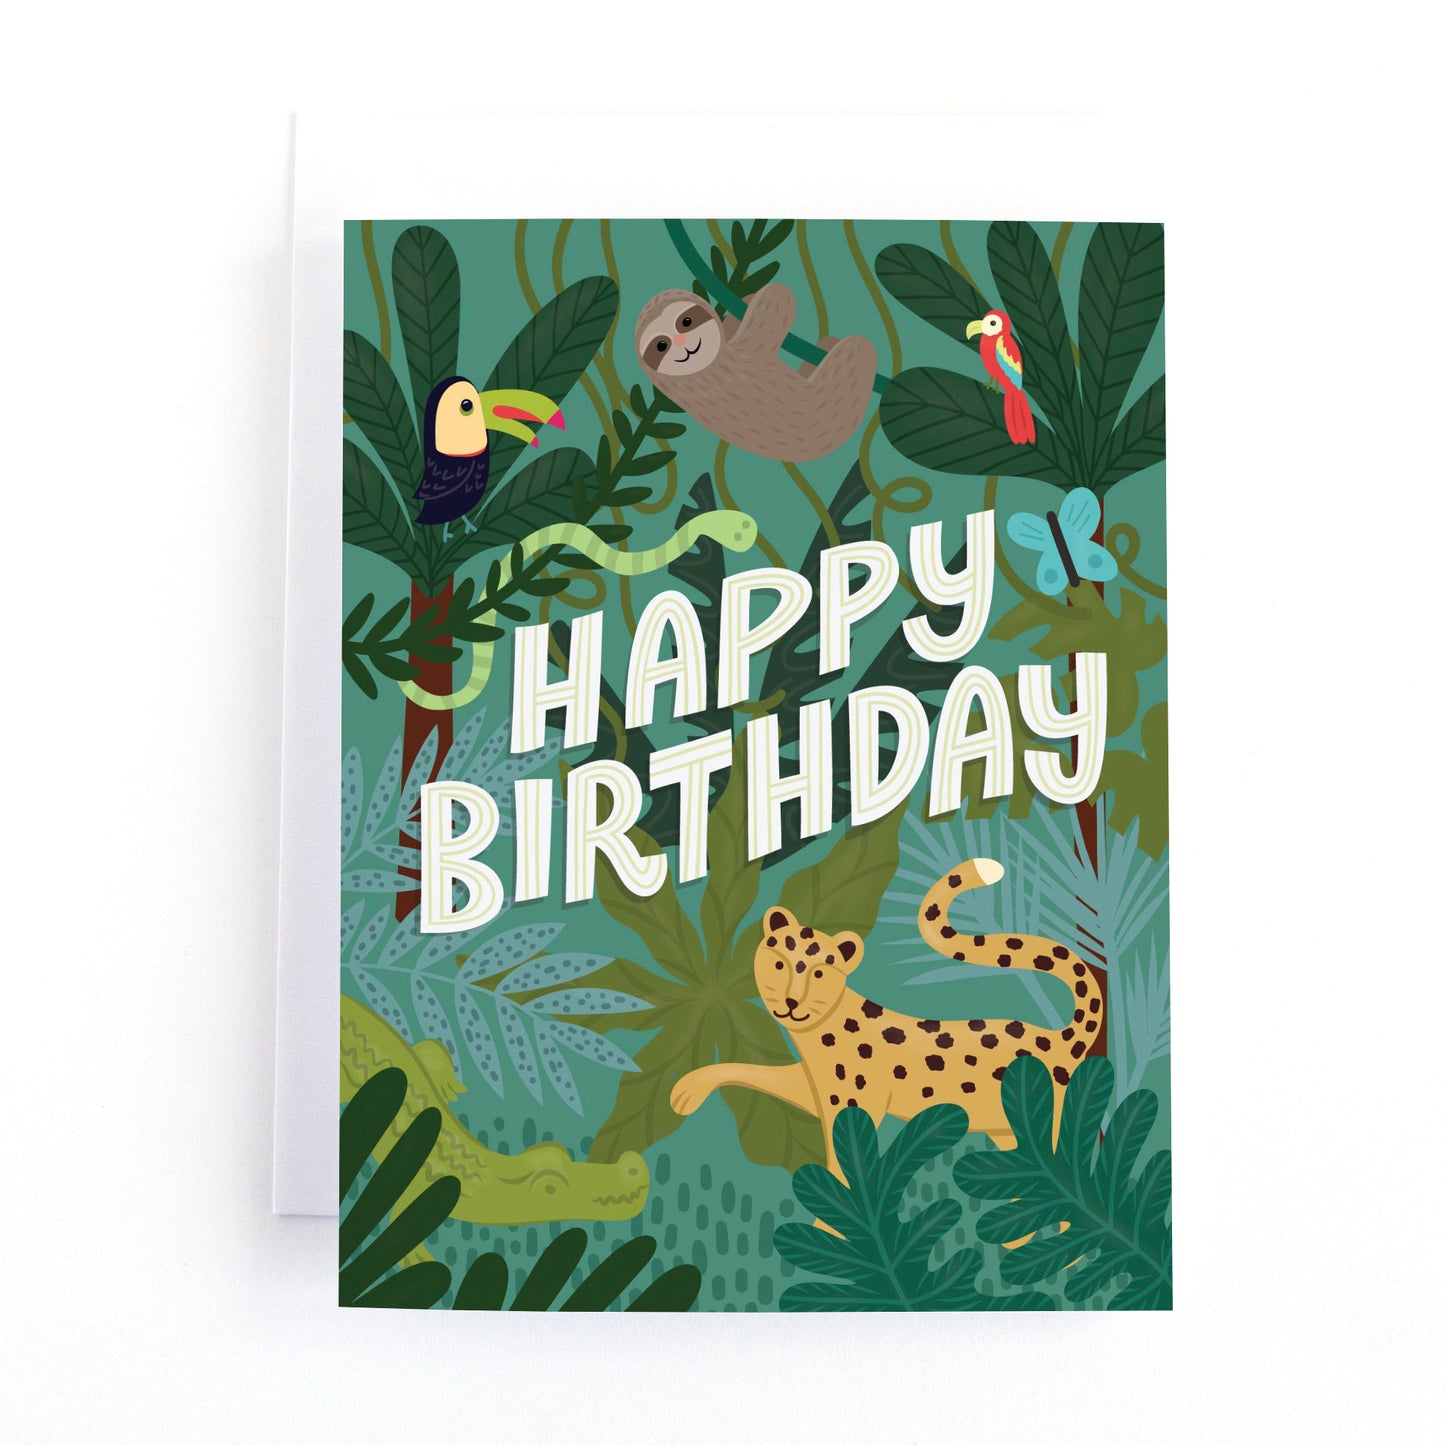 Kids jungle themed birthday card with rainforest animals in the jungel and the message, Happy Birthday.